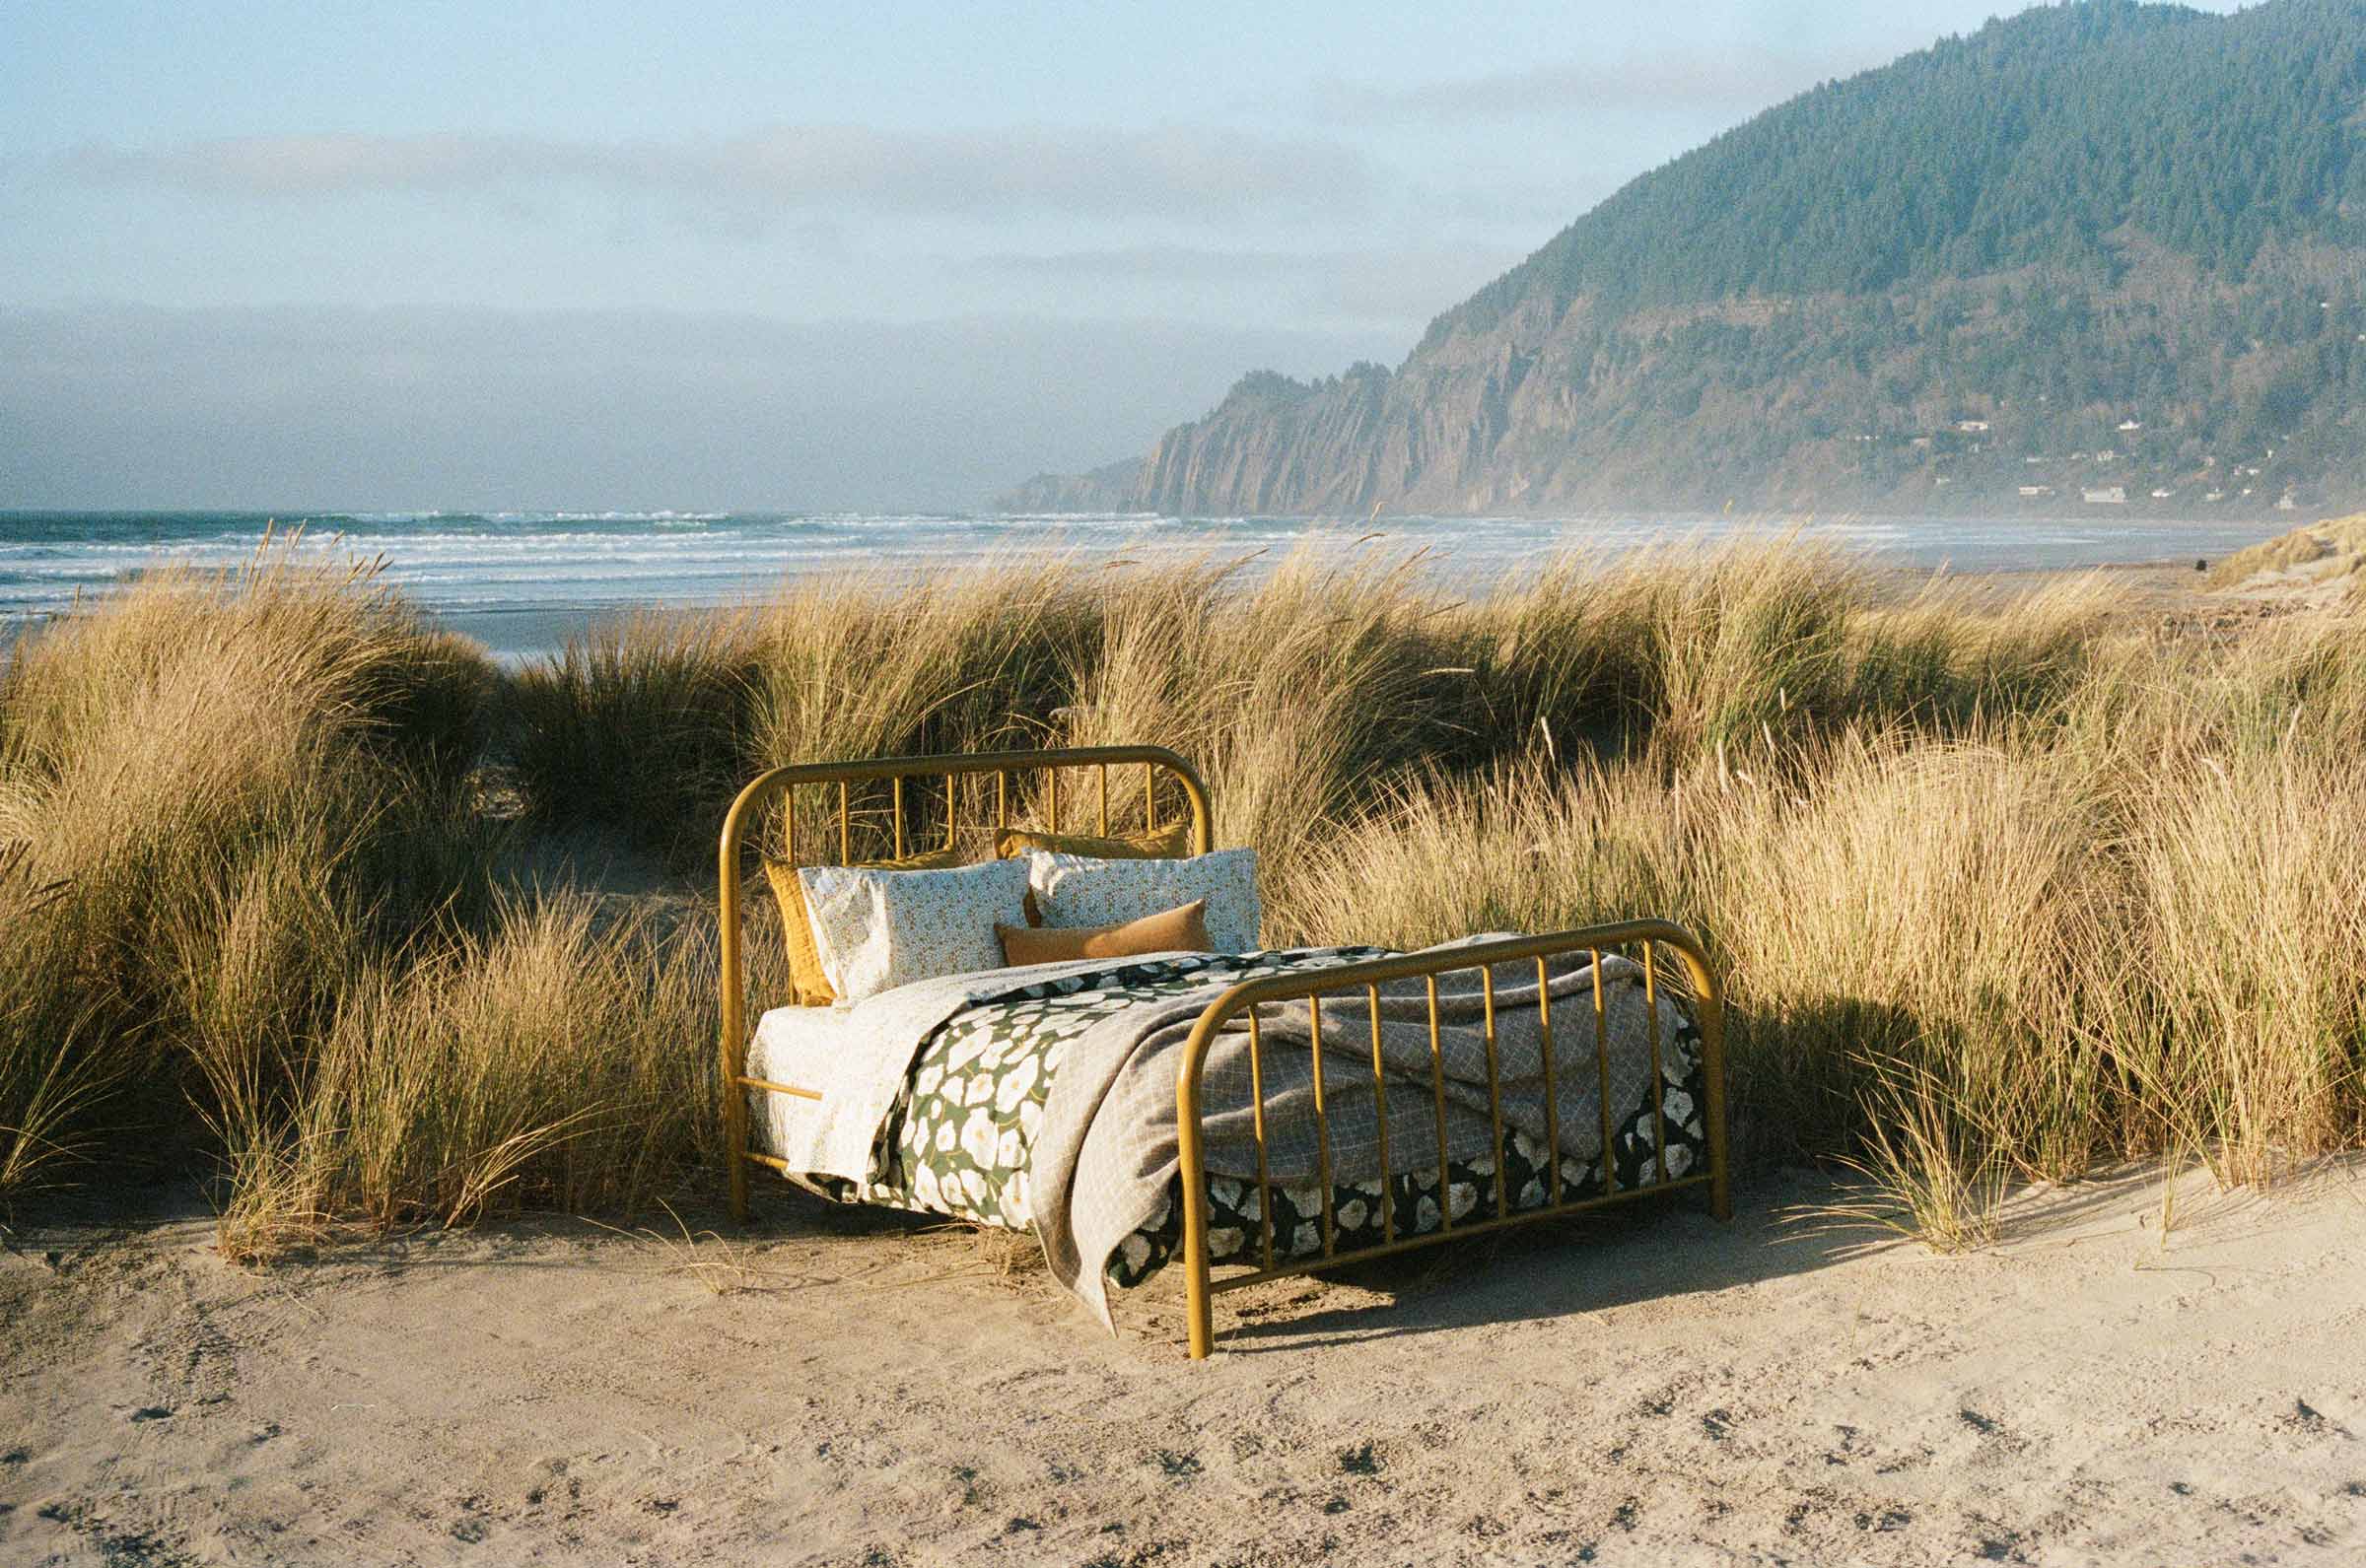 The Hamilton Bed by Schoolhouse on the beach styled with floral bedding.